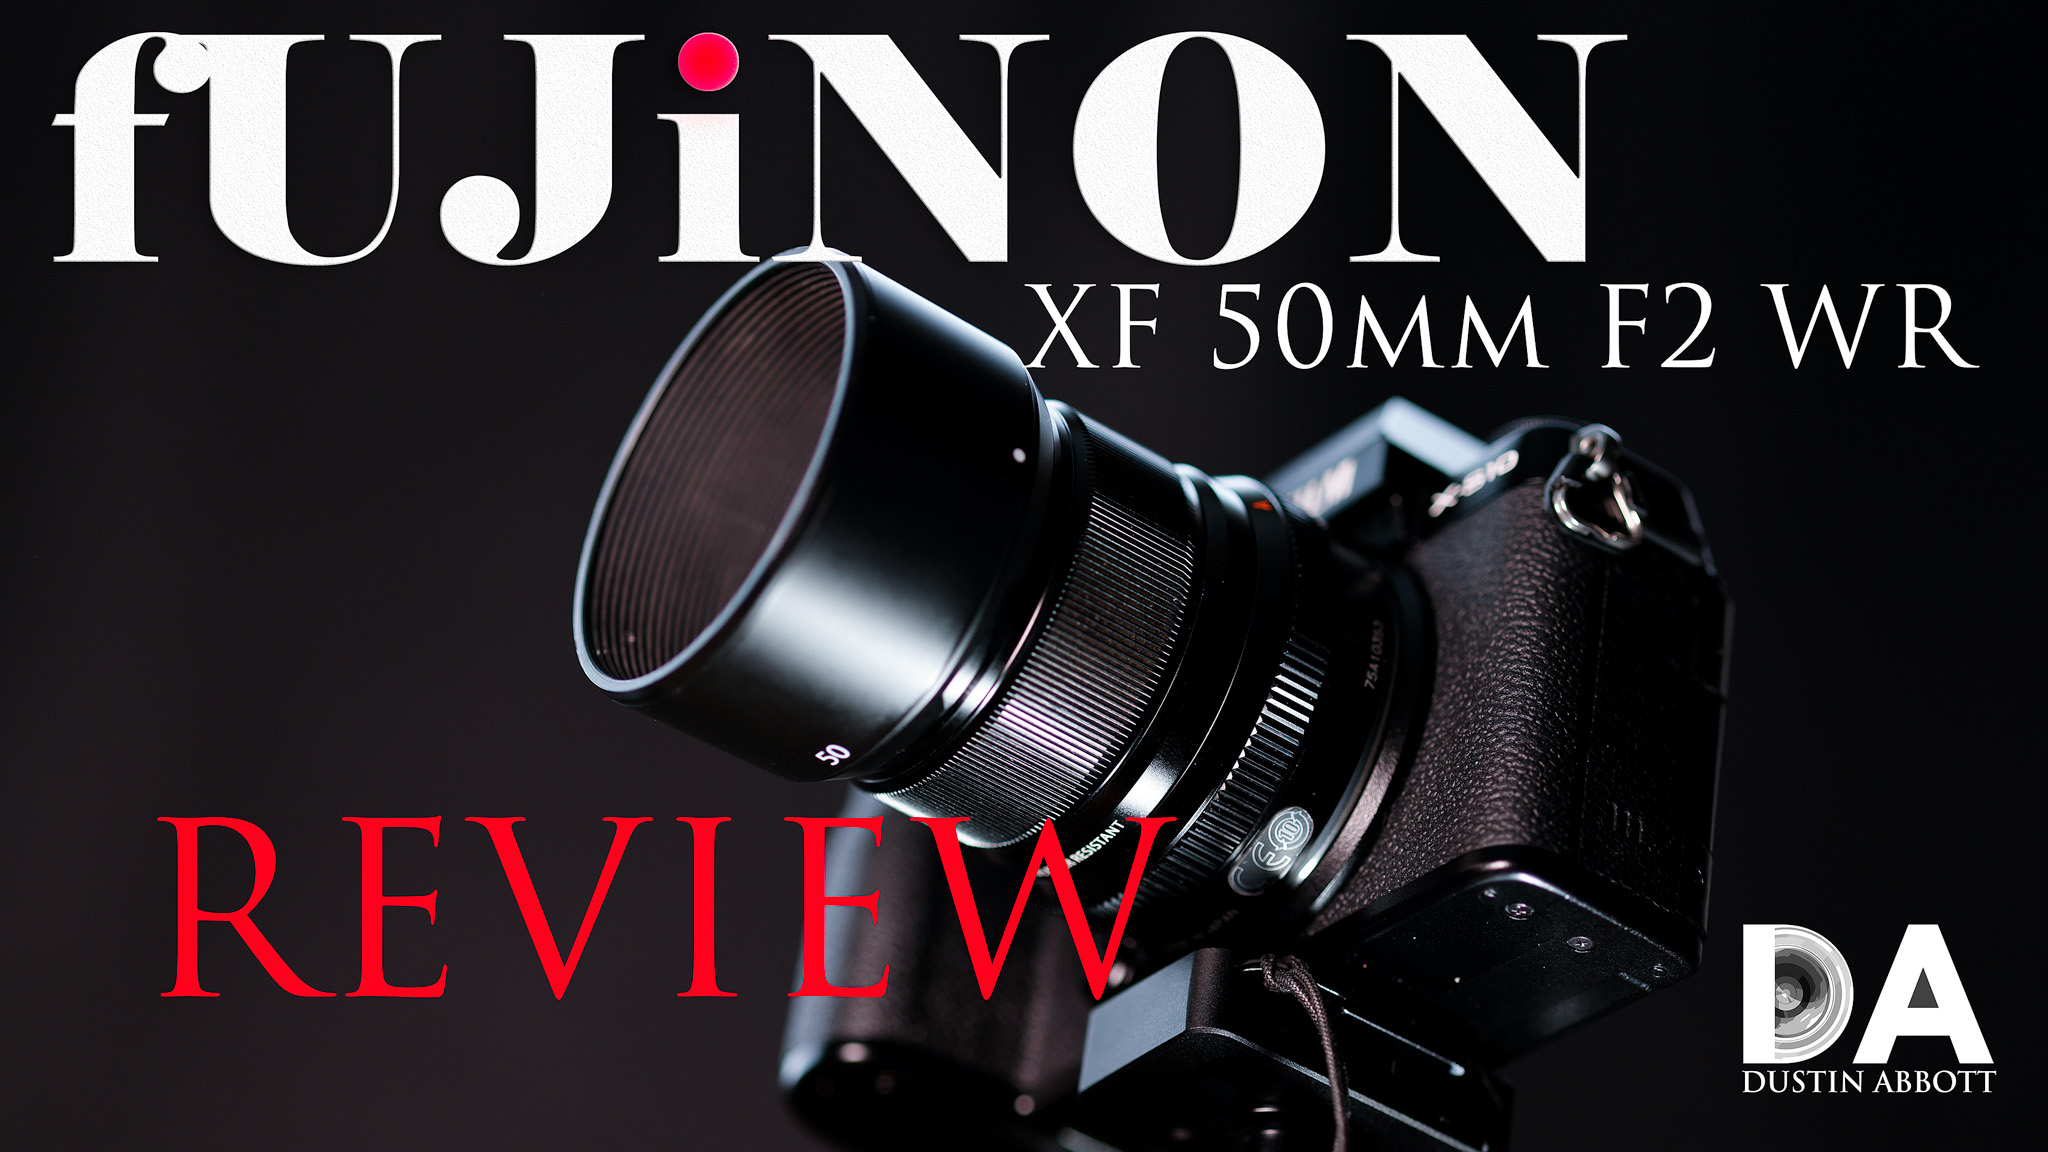 Fujinon Xf 50mm F2 Wr Review And Gallery Dustinabbott Net